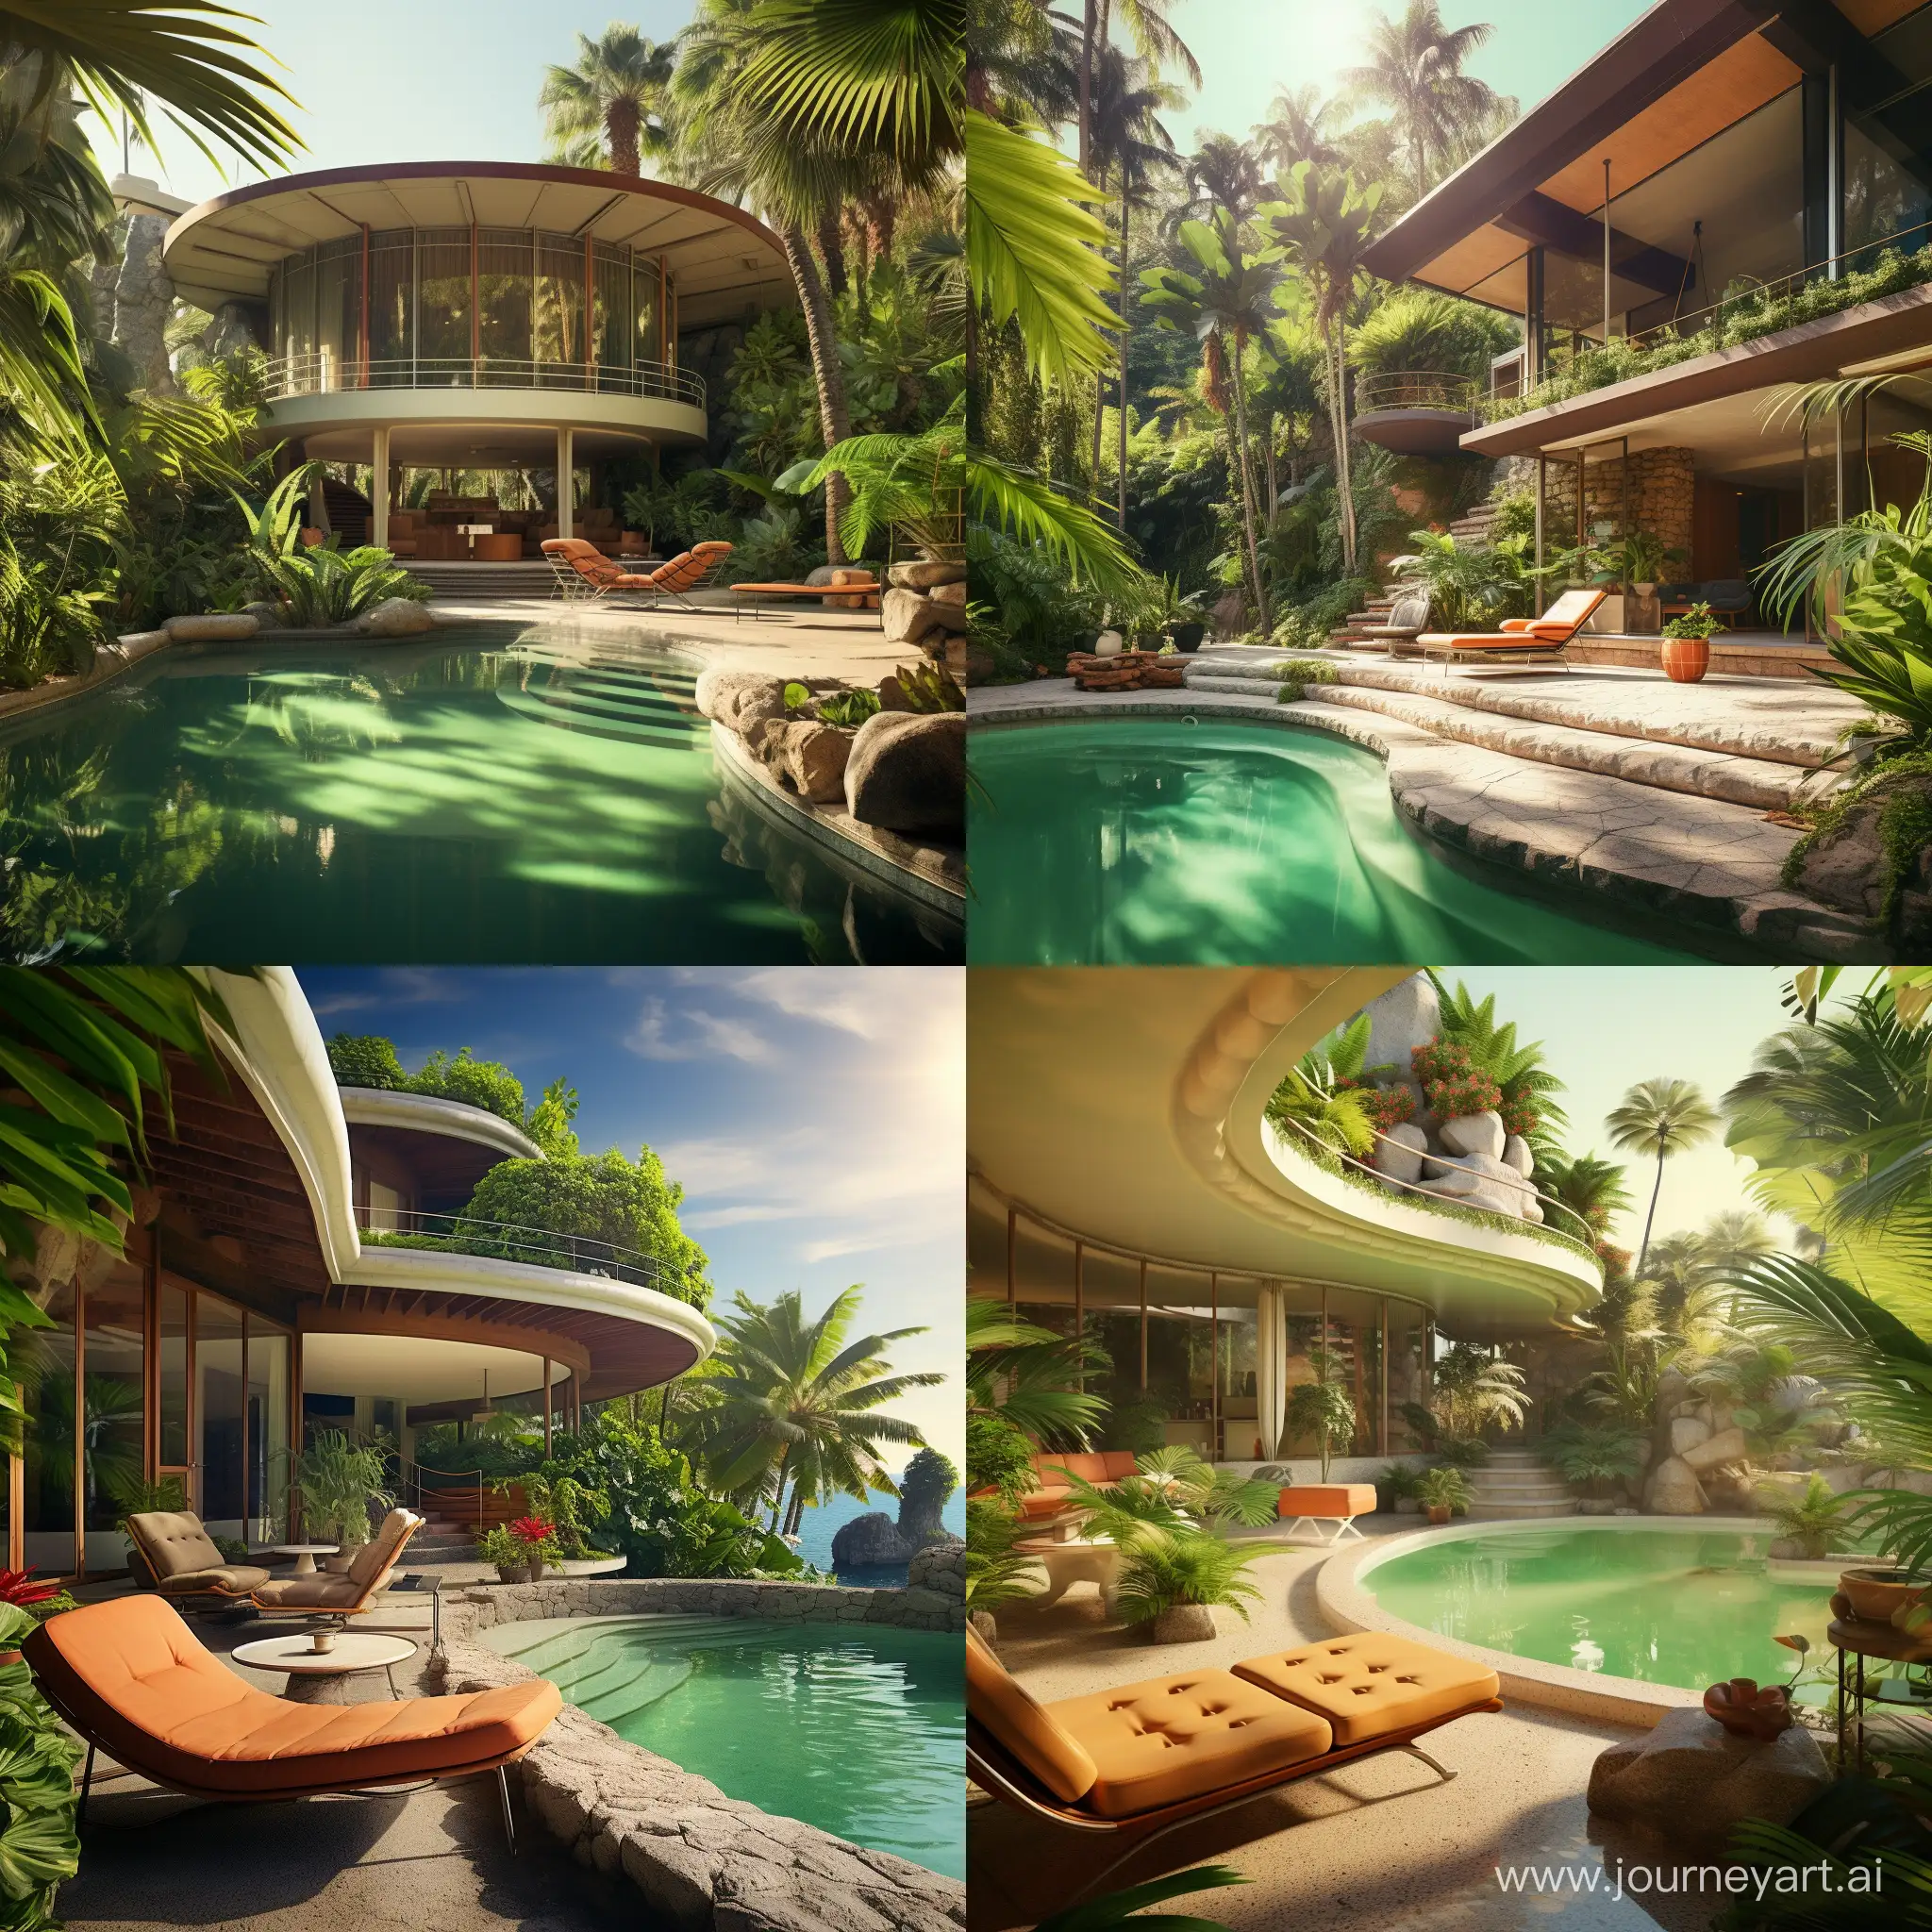 Visually stunning and architecturally sophisticated images embodying the mid-century modern style influenced by the works of Frank Lloyd Wright, John Lautner and Ludwig Mies Van De Rohe. The setting for this architectural marvel should be a paradise tropical landscape, with lush vegetation, serene waters, and an overall atmosphere of tranquility. 8K, HQ.